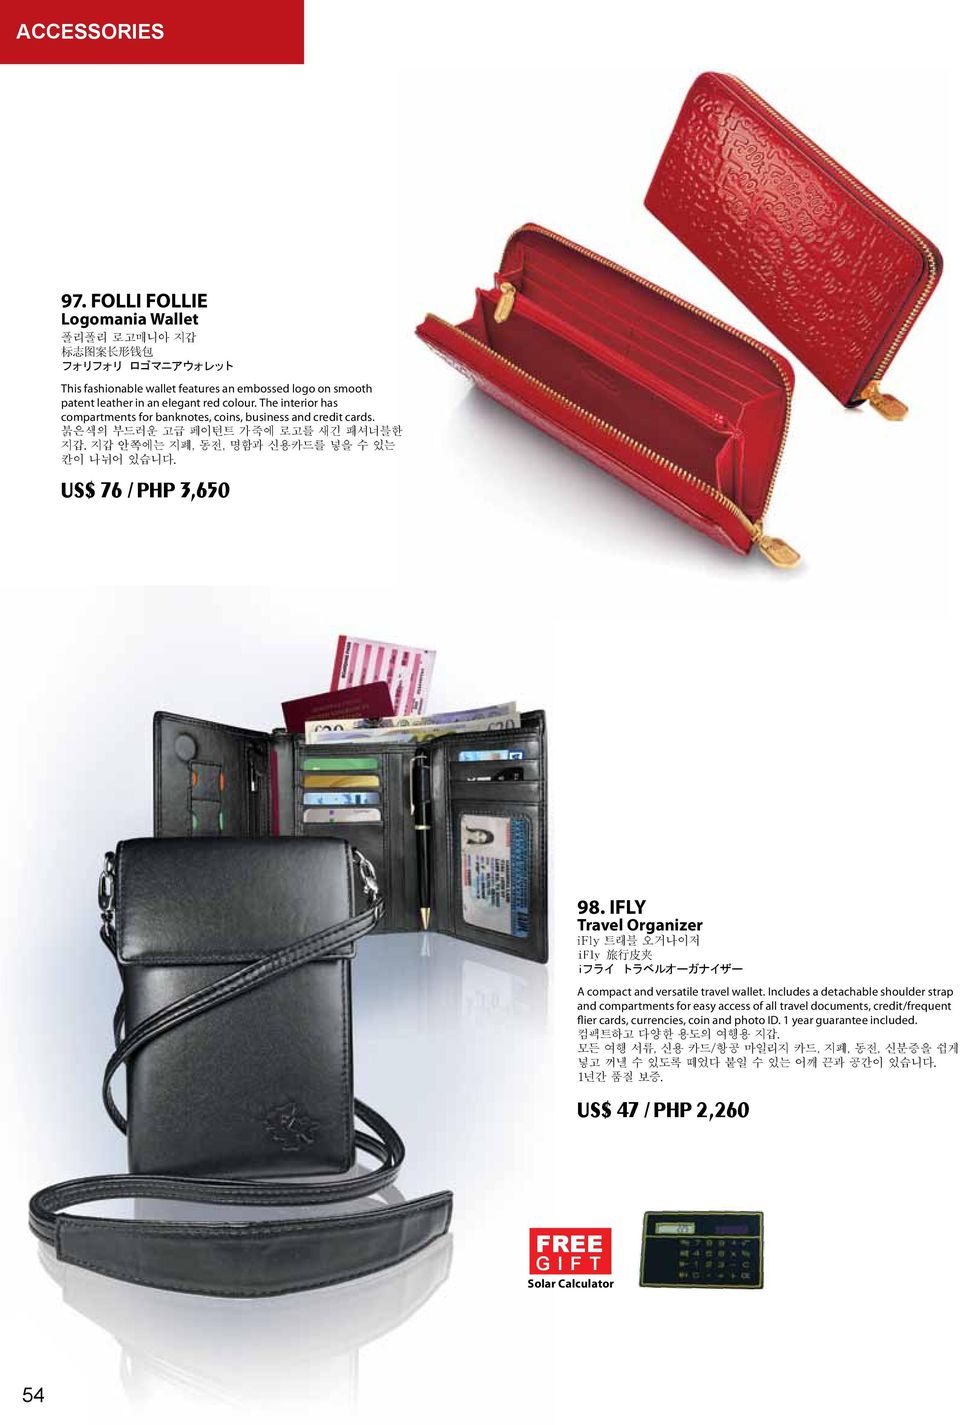 IFLY Travel Organizer ifly 트래블 오거나이저 ifly 旅 行 皮 夹 iフライ トラベルオーガナイザー A compact and versatile travel wallet.